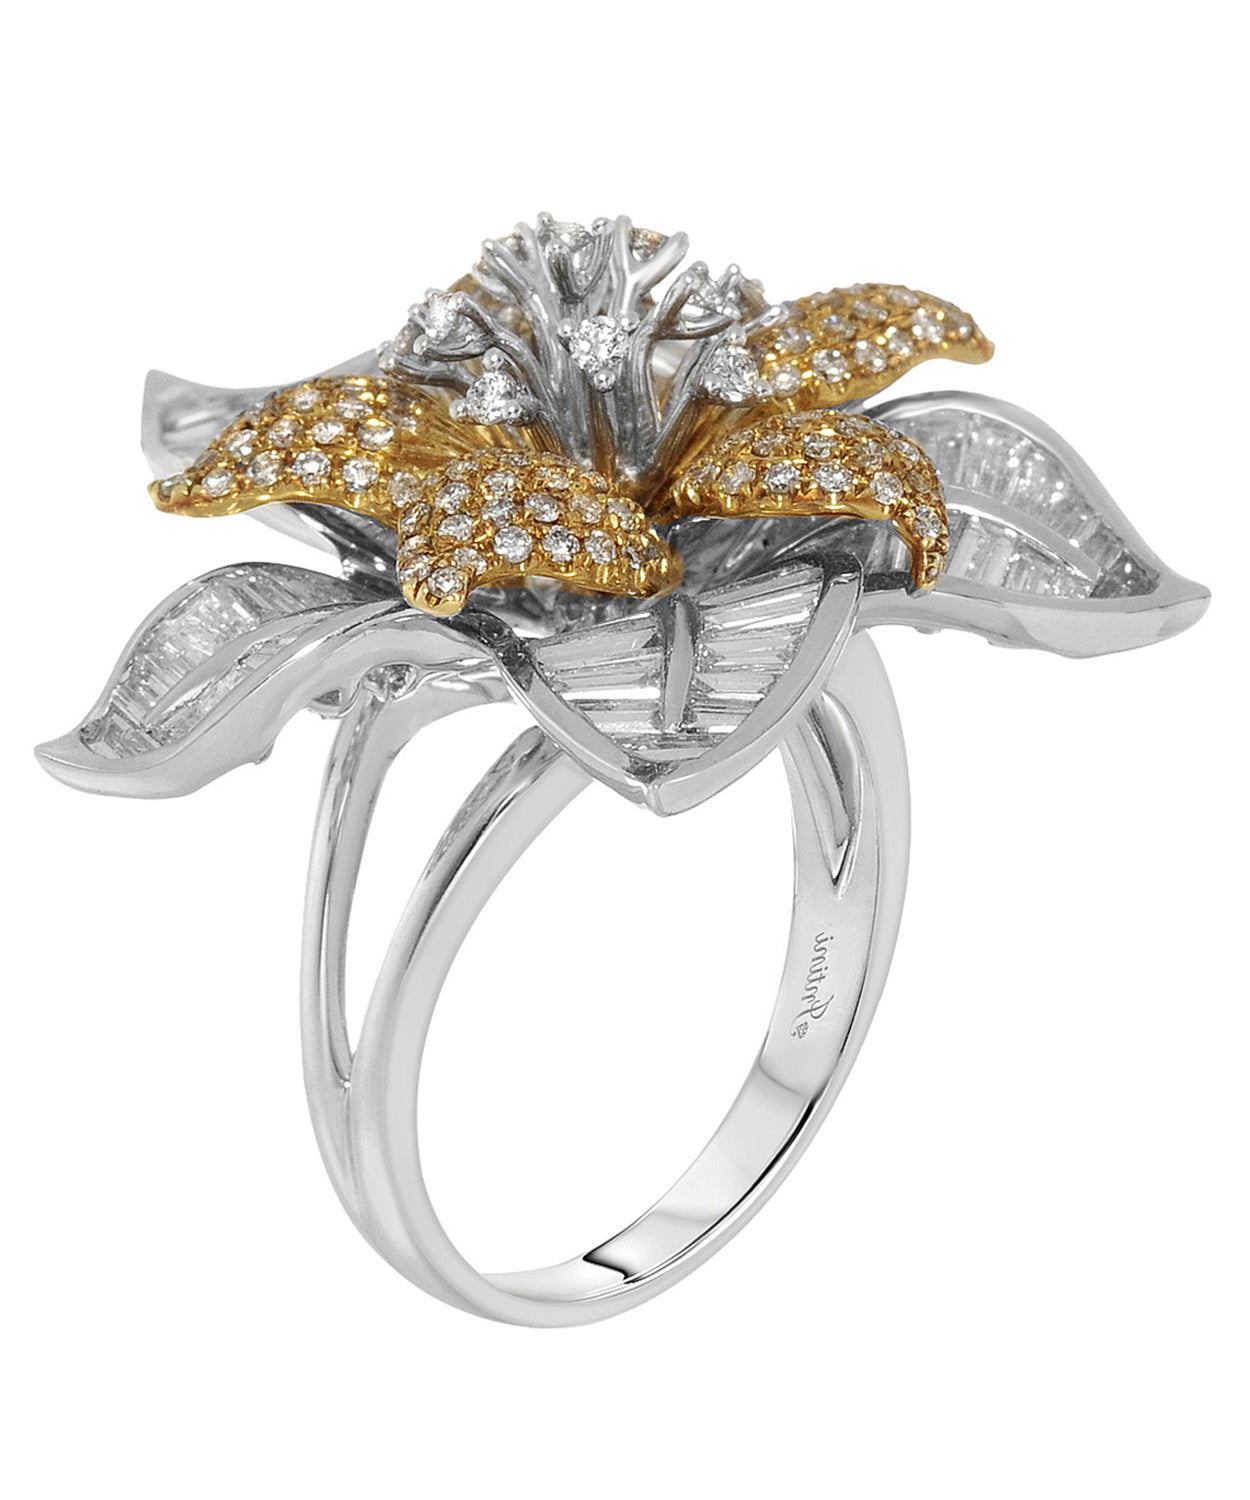 Allure Collection 3.36 ctw Superior Diamond 18k Gold Flower Cocktail Ring View 2